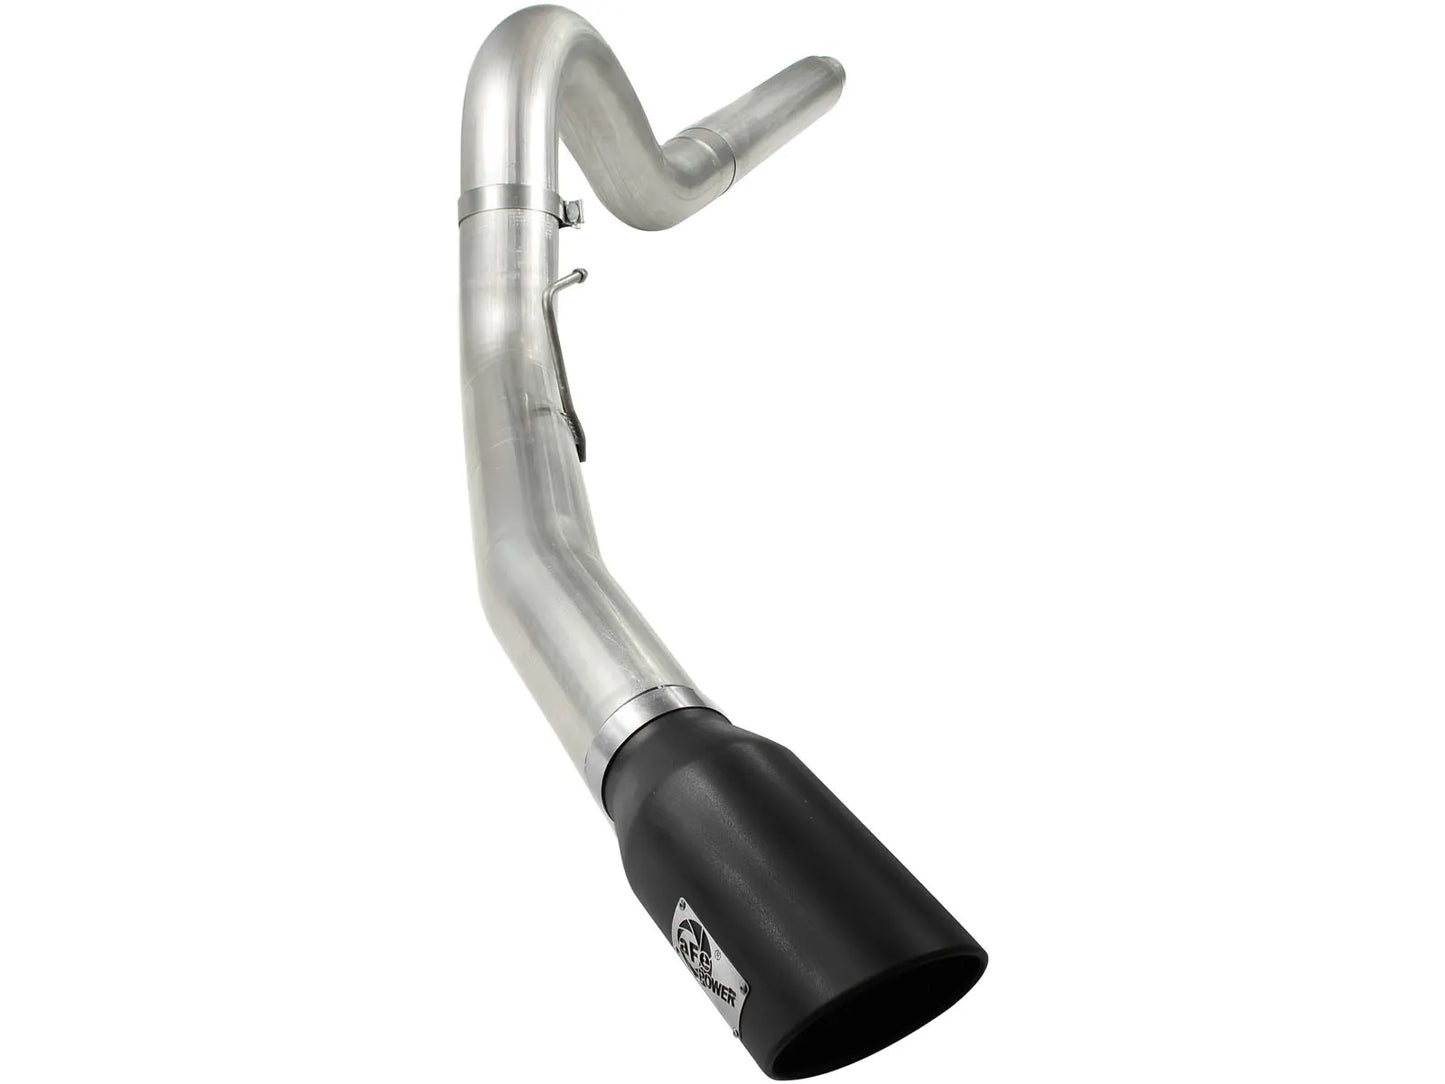 aFe Large Bore-HD DPF-Back Exhaust System for 2008-2010 Ford Trucks (49-43054-B)